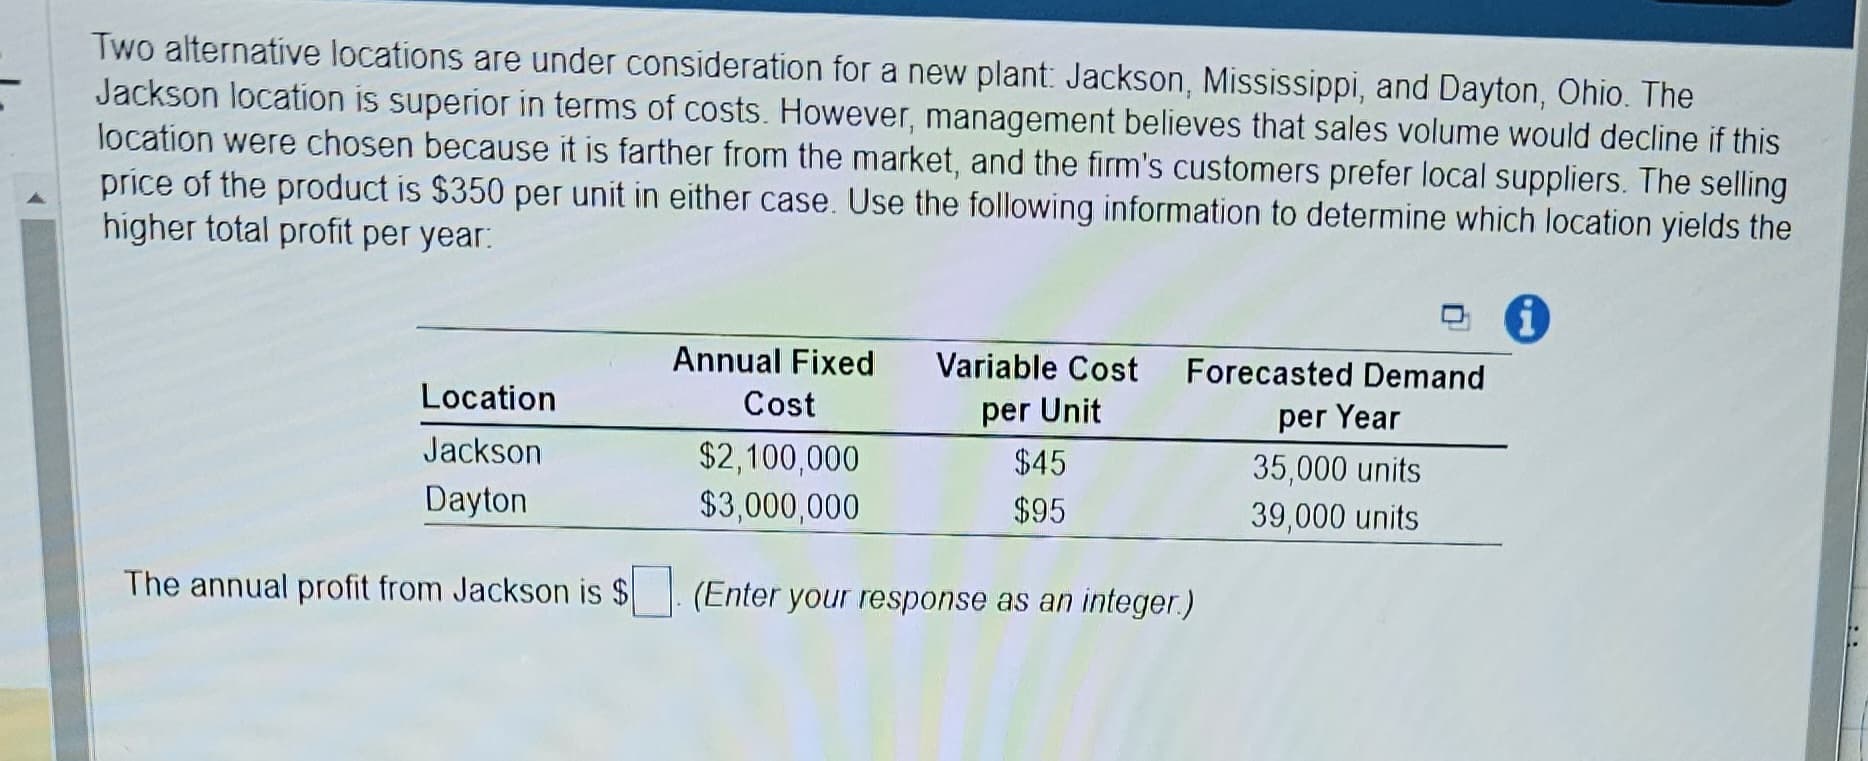 Two alternative locations are under consideration for a new plant: Jackson, Mississippi, and Dayton, Ohio. The
Jackson location is superior in terms of costs. However, management believes that sales volume would decline if this
location were chosen because it is farther from the market, and the firm's customers prefer local suppliers. The selling
price of the product is $350 per unit in either case. Use the following information to determine which location yields the
higher total profit per year:
Location
Jackson
Dayton
The annual profit from Jackson is $
Annual Fixed
Cost
$2,100,000
$3,000,000
Variable Cost
per Unit
45
$95
Forecasted Demand
per Year
35,000 units
39,000 units
(Enter your response as an integer.)
..